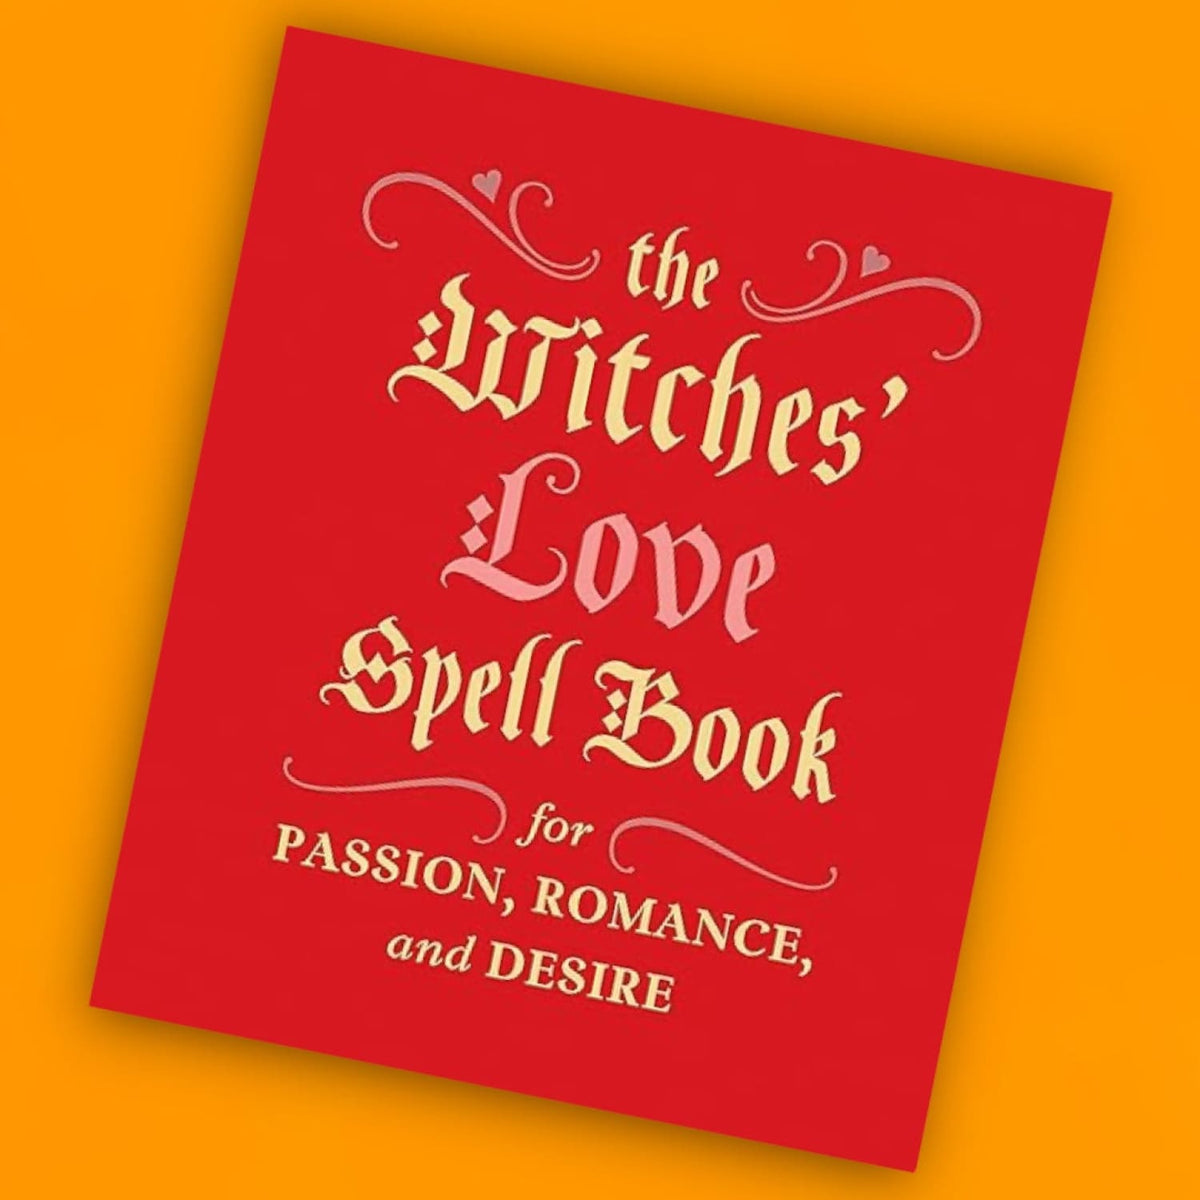 The Witches’ Love Mini Spell Book Bff Gifts - Book - Modern